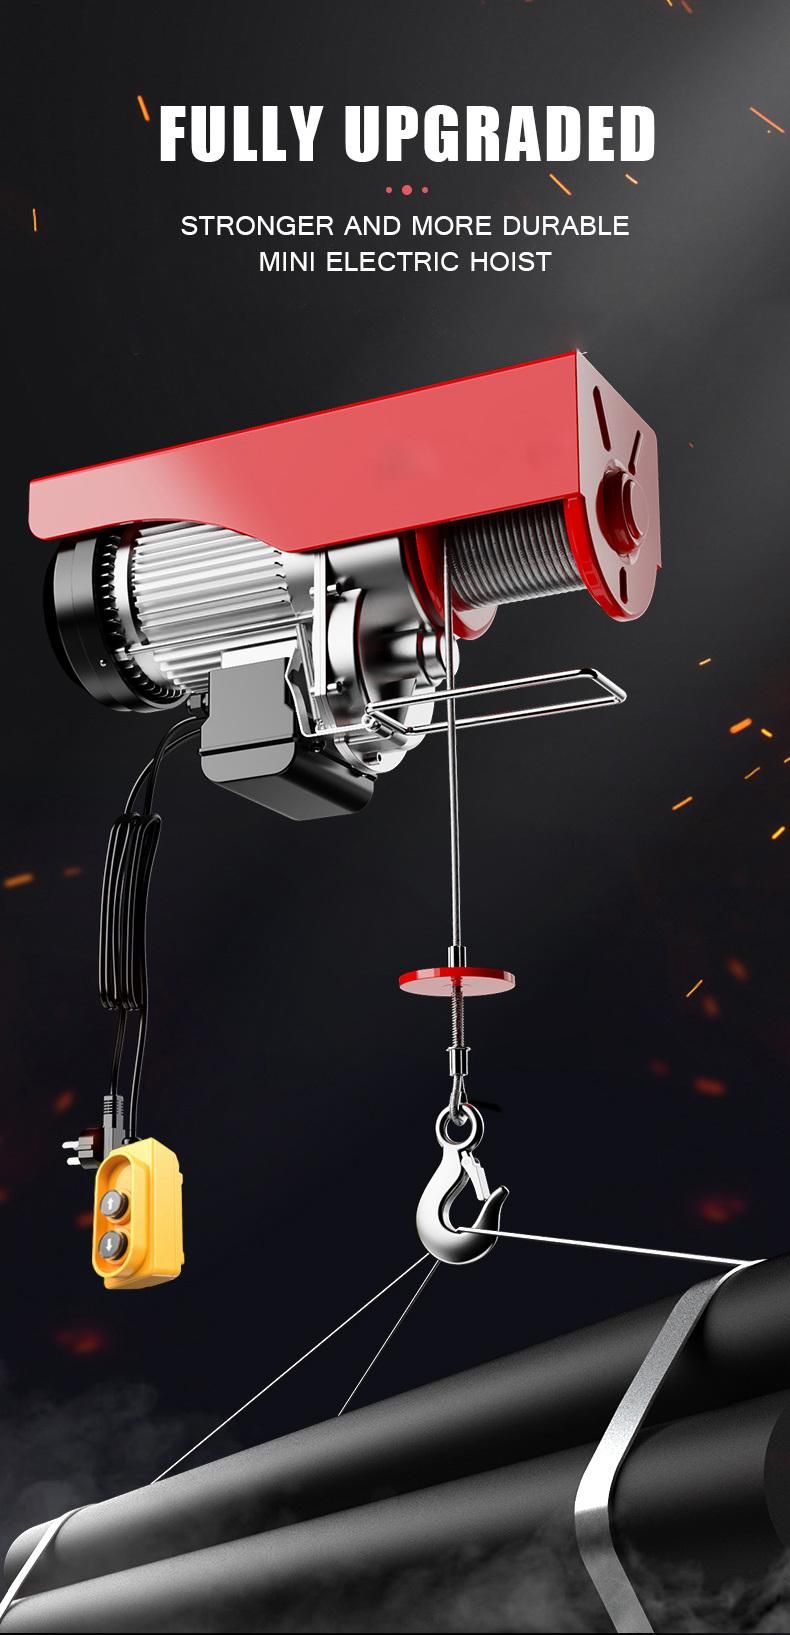 980W Motor Power PA400 Electric Hoist with Cable Control